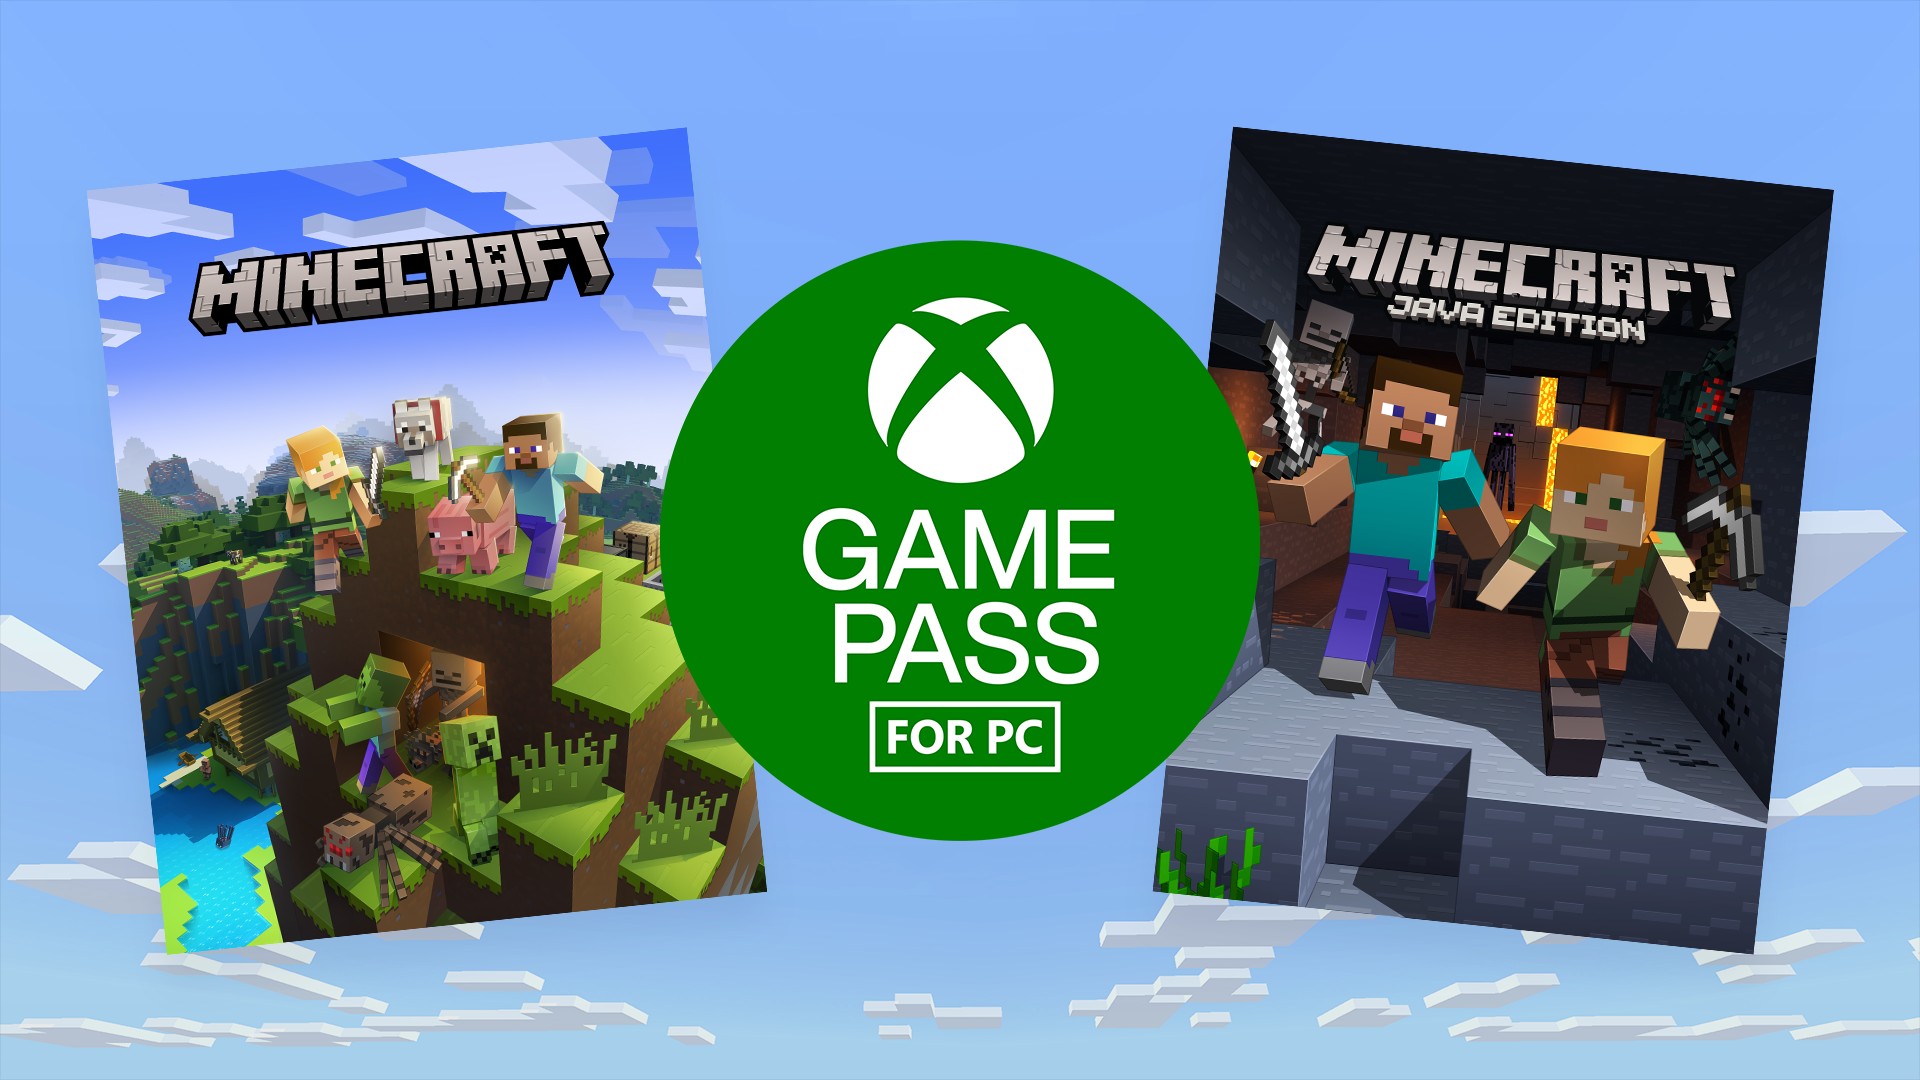 Minecraft PC Bundle Now Available with Game Pass for PC